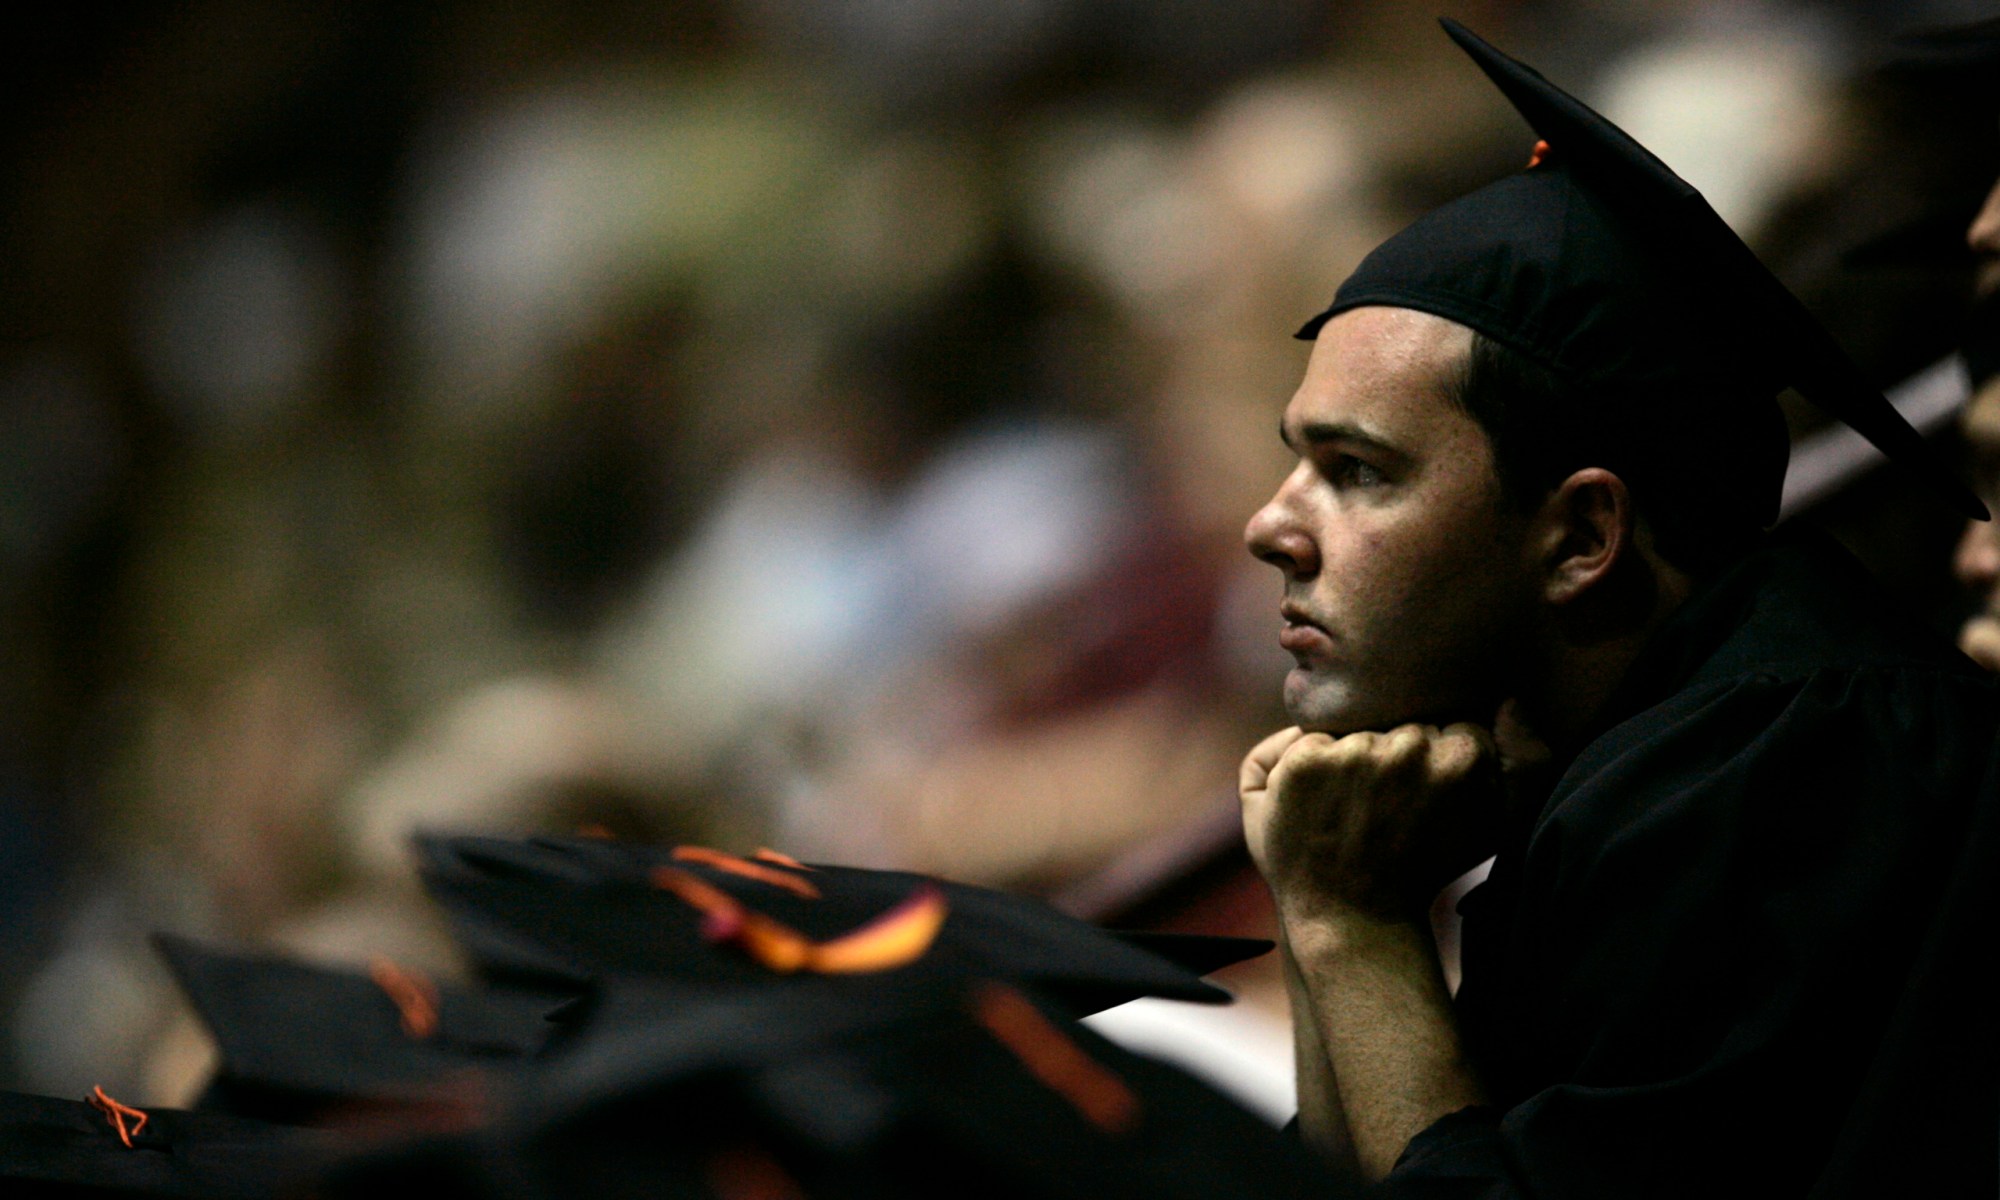 An undergraduate watches during an undergraduate College of Engineering graduation ceremony at Virginia Tech. (AP/Carolyn Kaster)